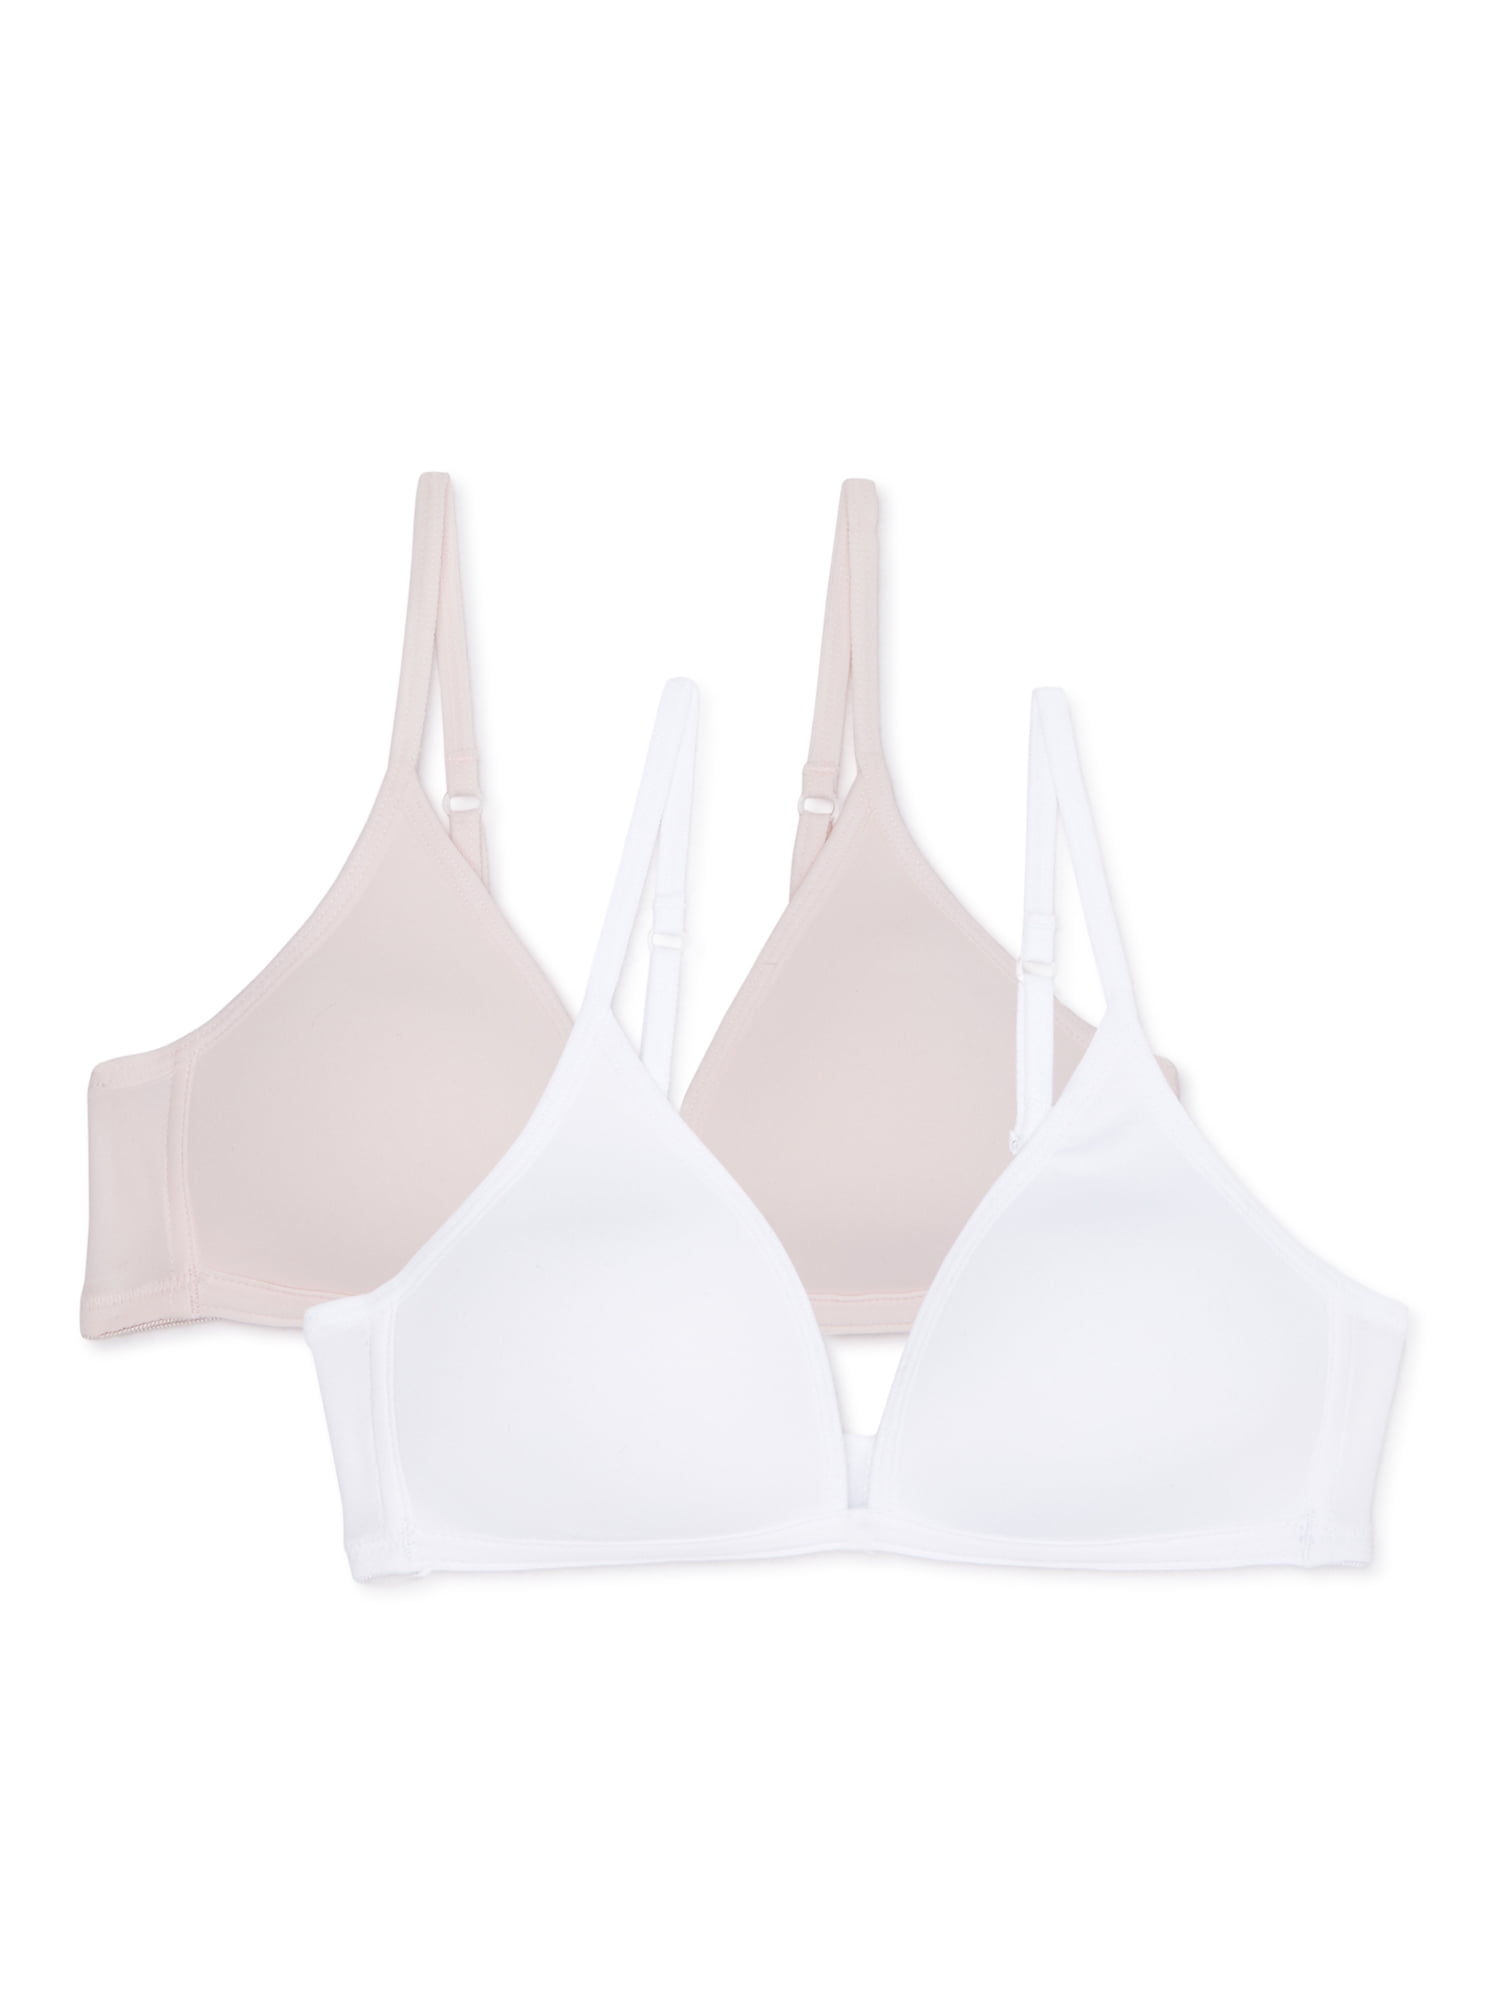 Maidenform Girls Molded Wireless Bras, 2-Pack, Sizes 30A-36A 